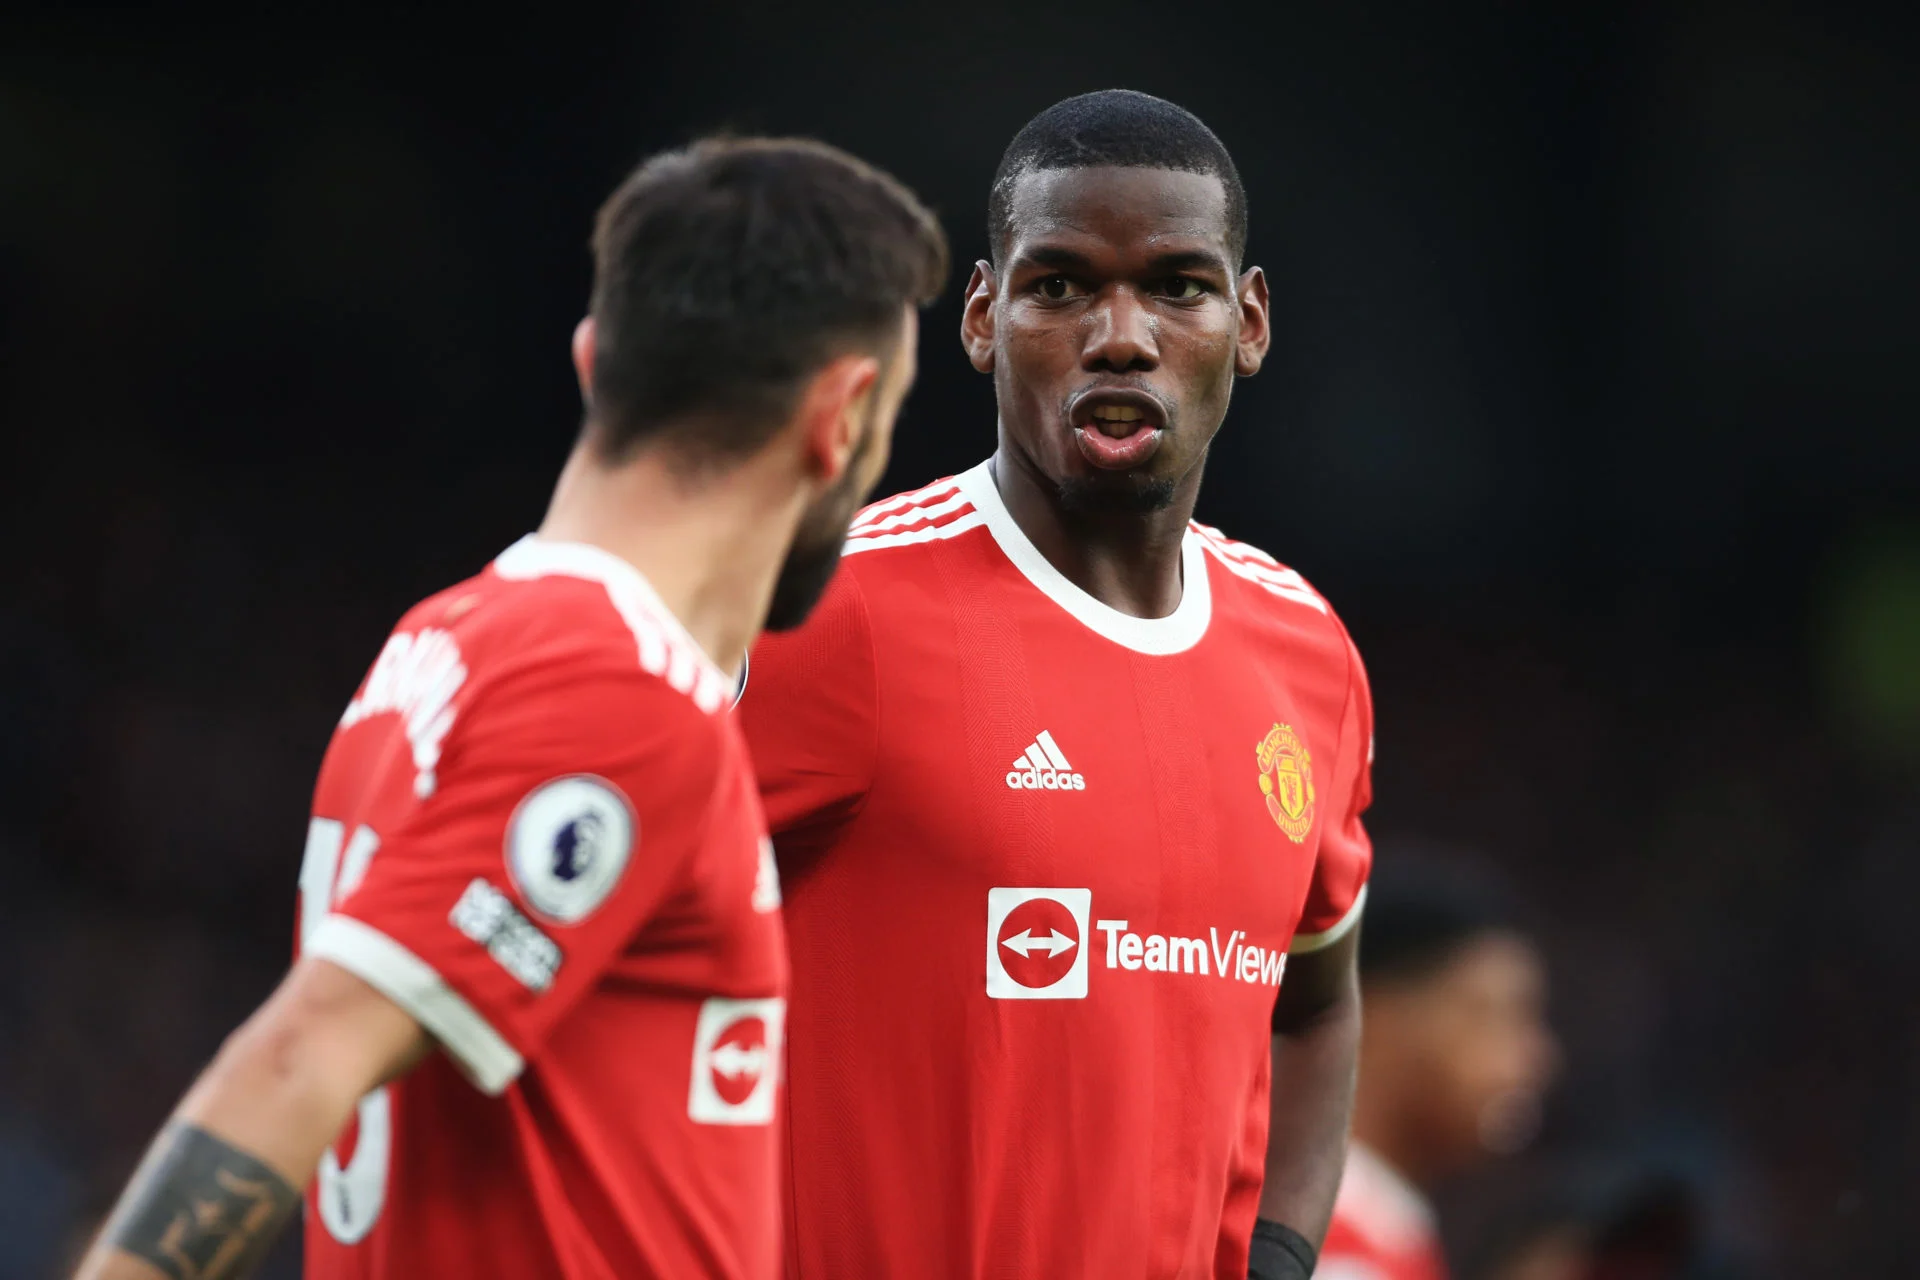 Manchester United star has just done what fans always wanted Paul Pogba to do